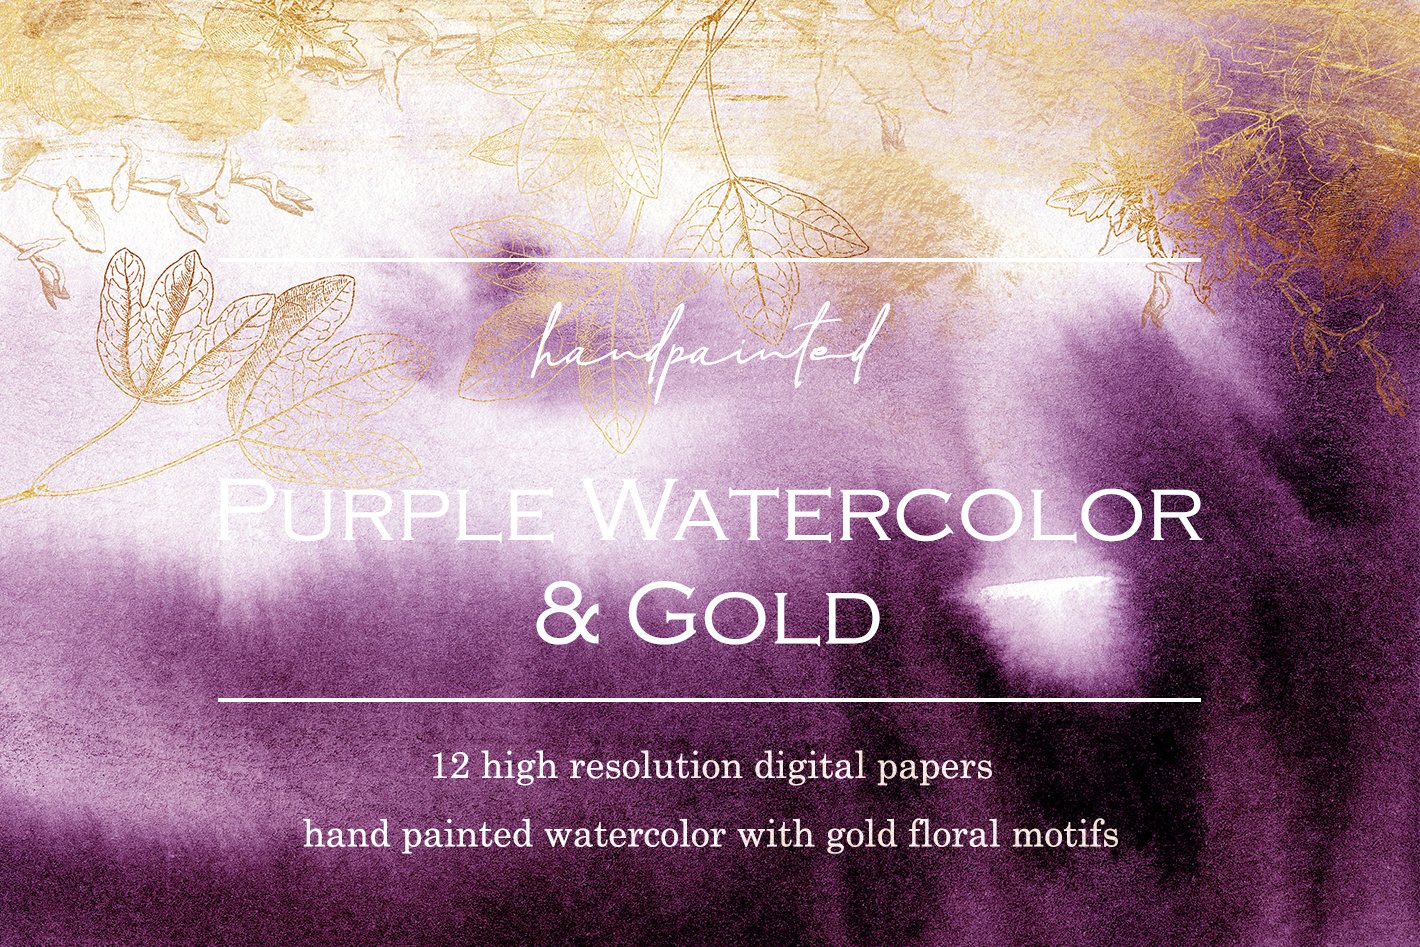 Gold floral watercolor digital paper cover image.